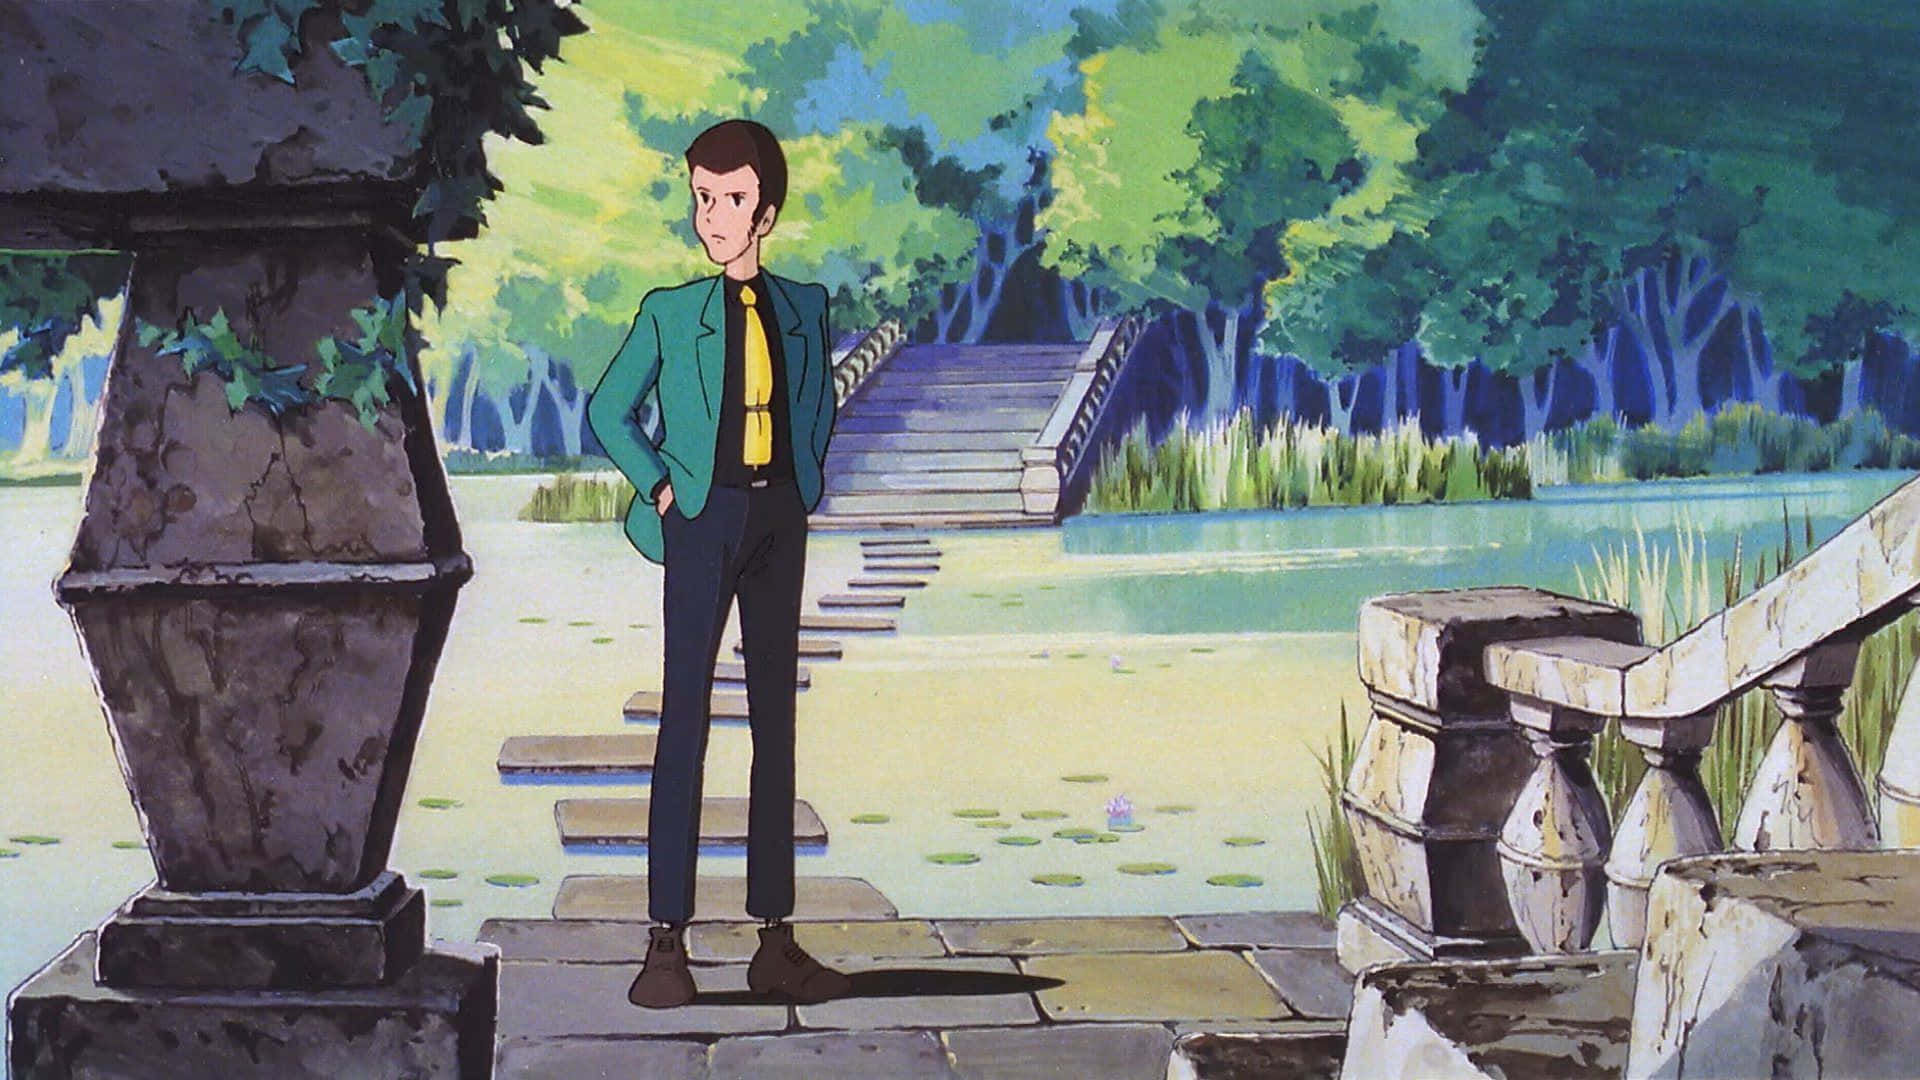 Lupin III and his gang in action Wallpaper